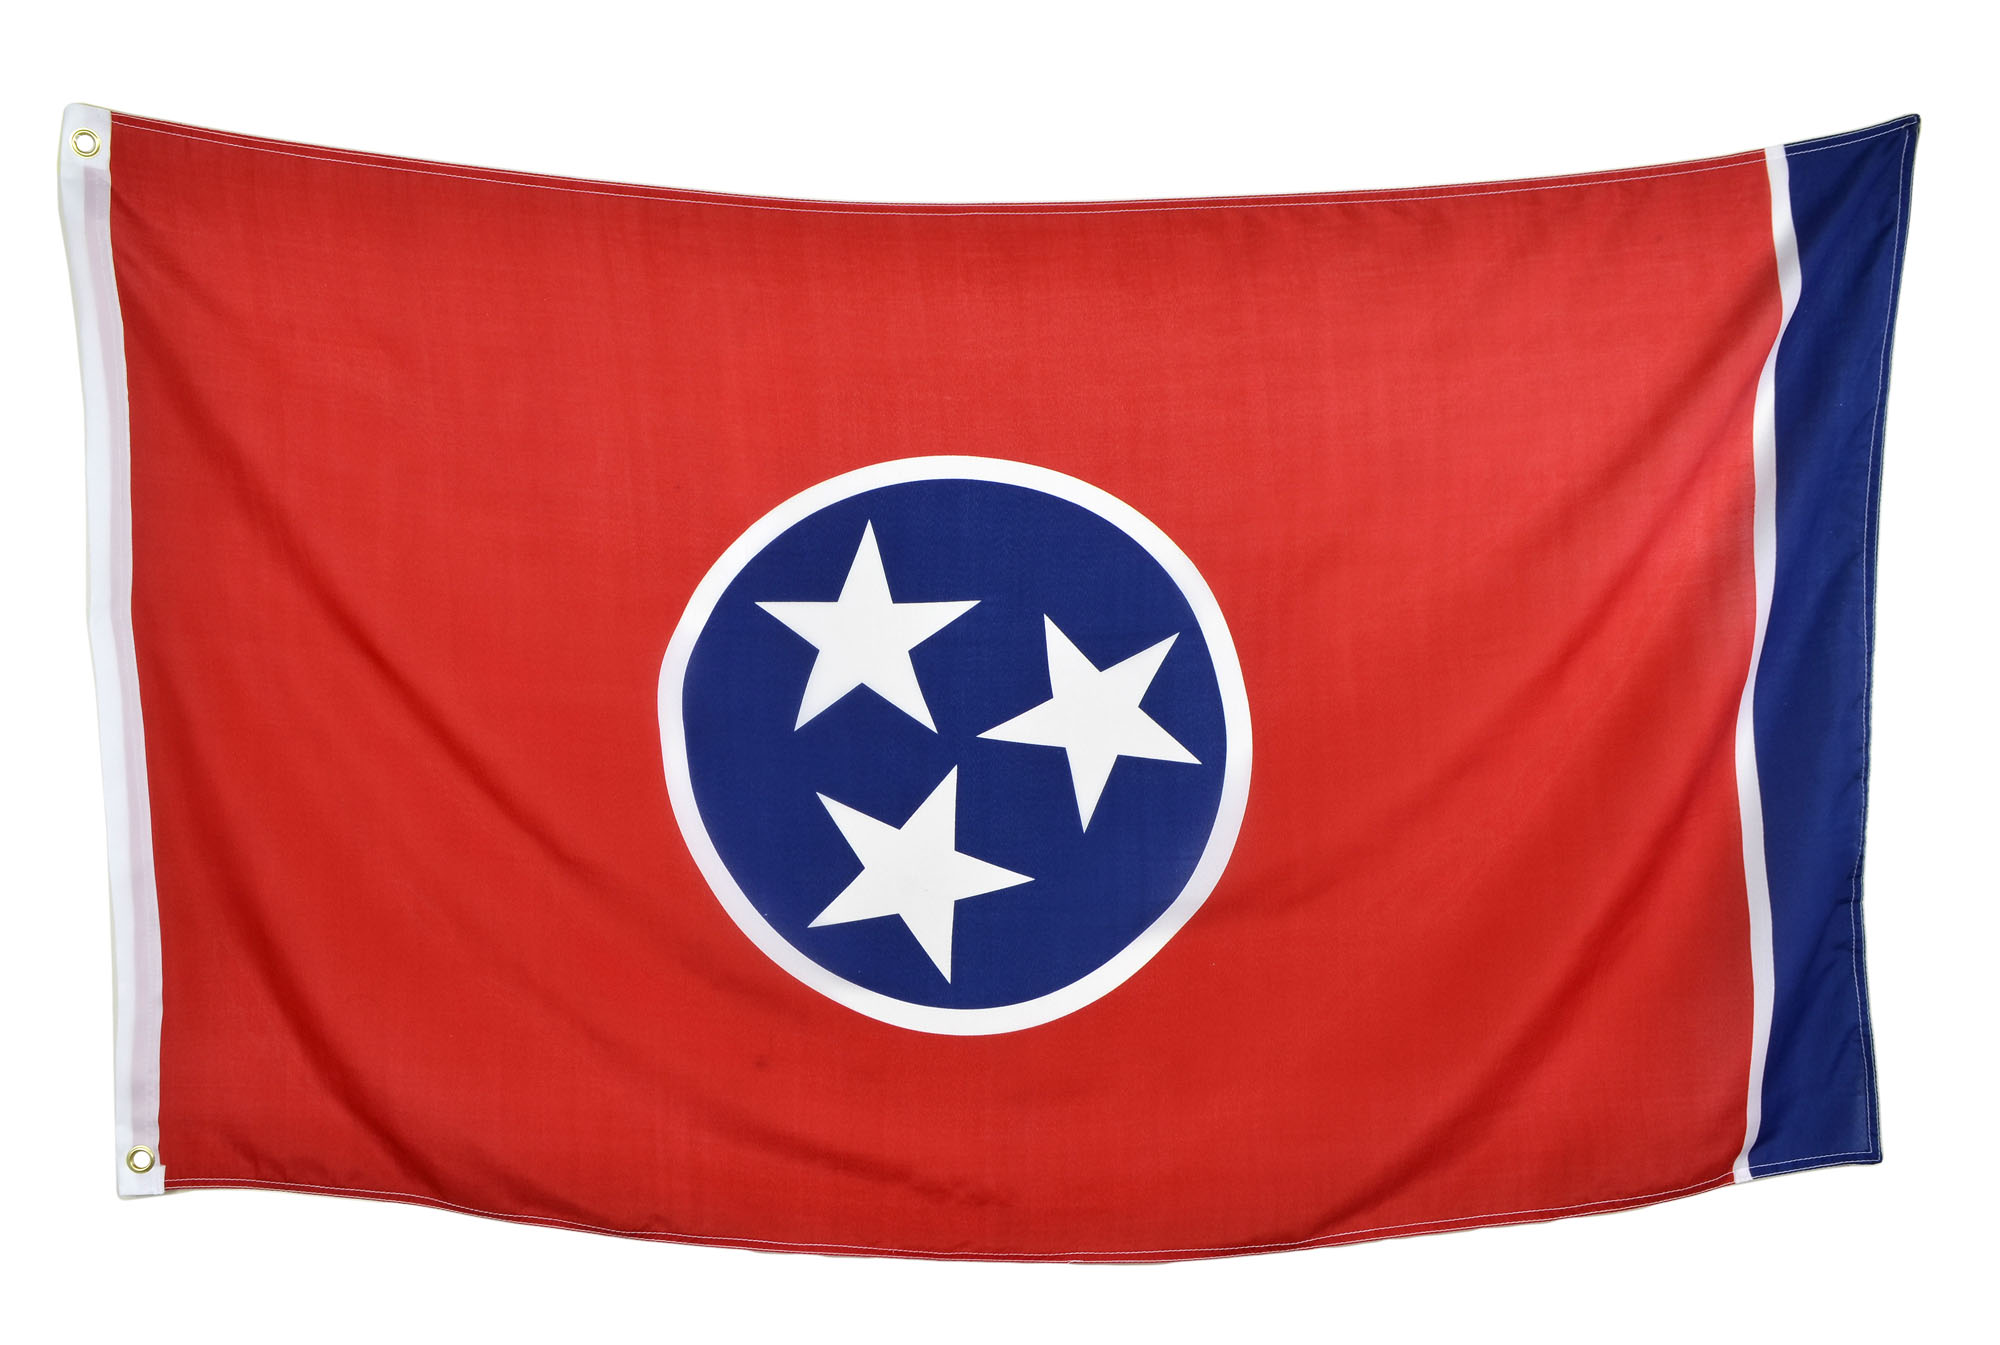 Shop72 Tennessee Flags 3x5' Sturdy Polyester Brass Grommets Double Stitched